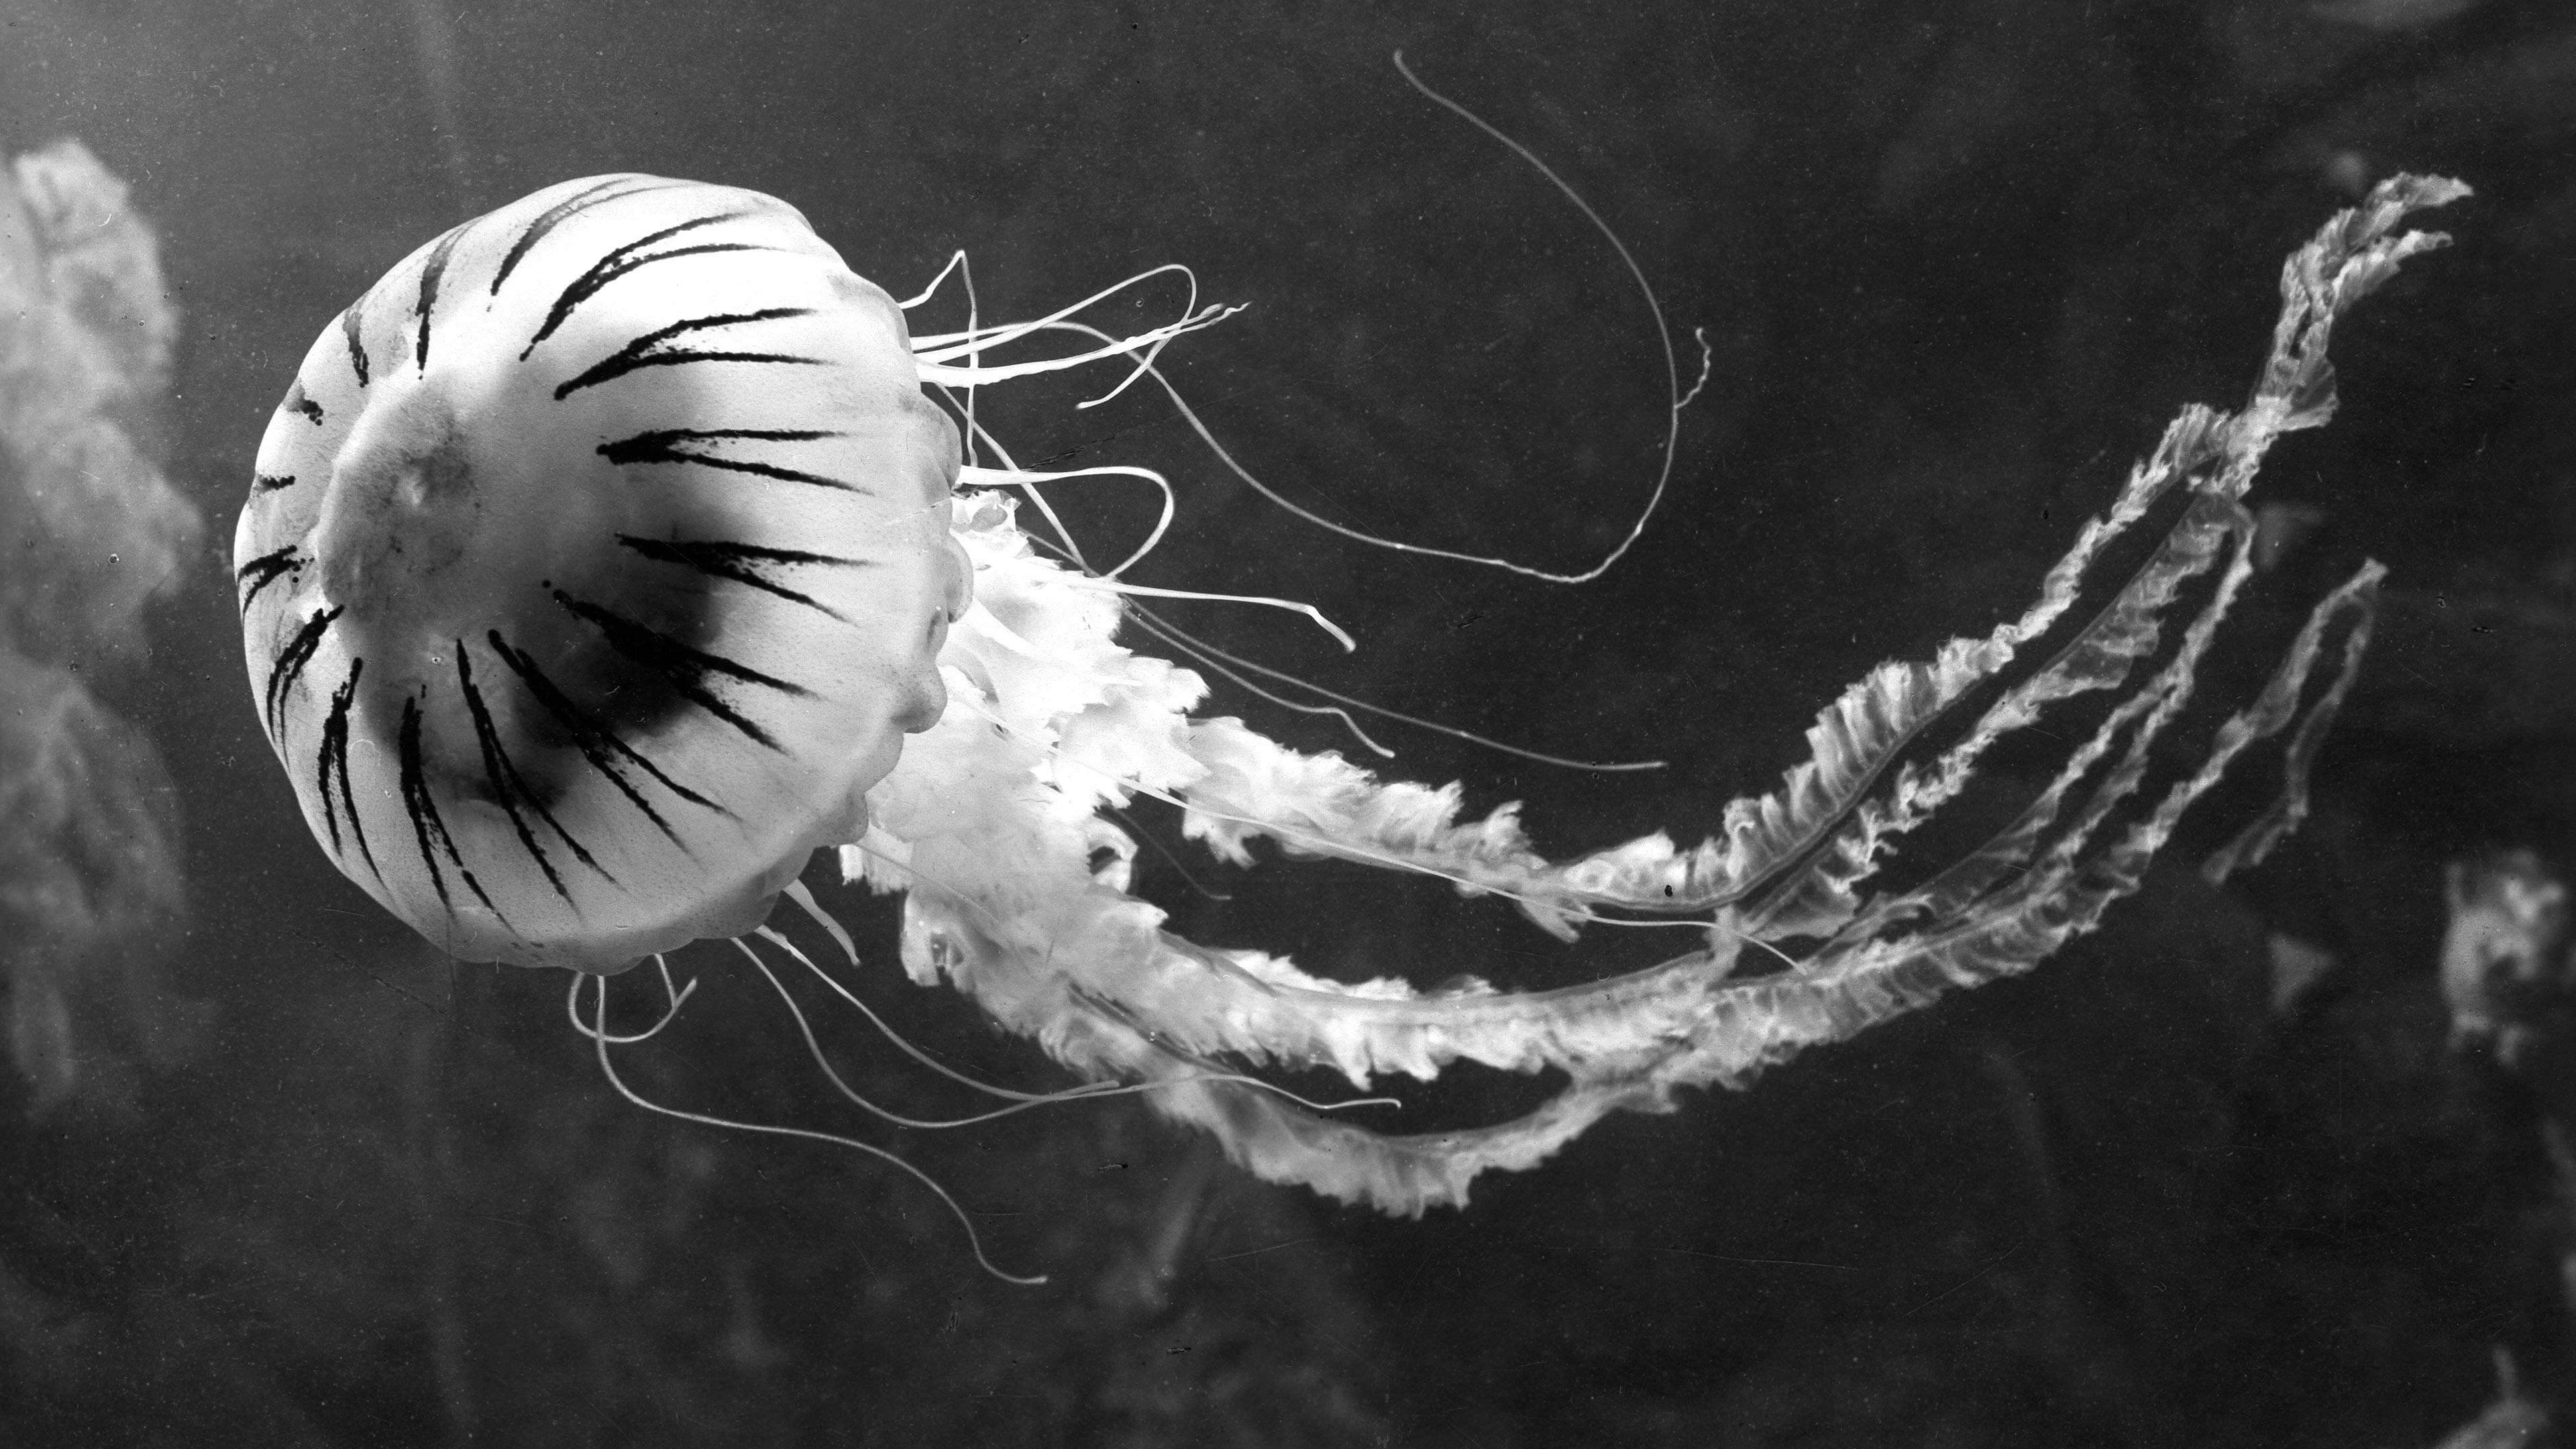 You might hate jellyfish. But almost everything in the ocean depends on  them (and we do too) - The Correspondent